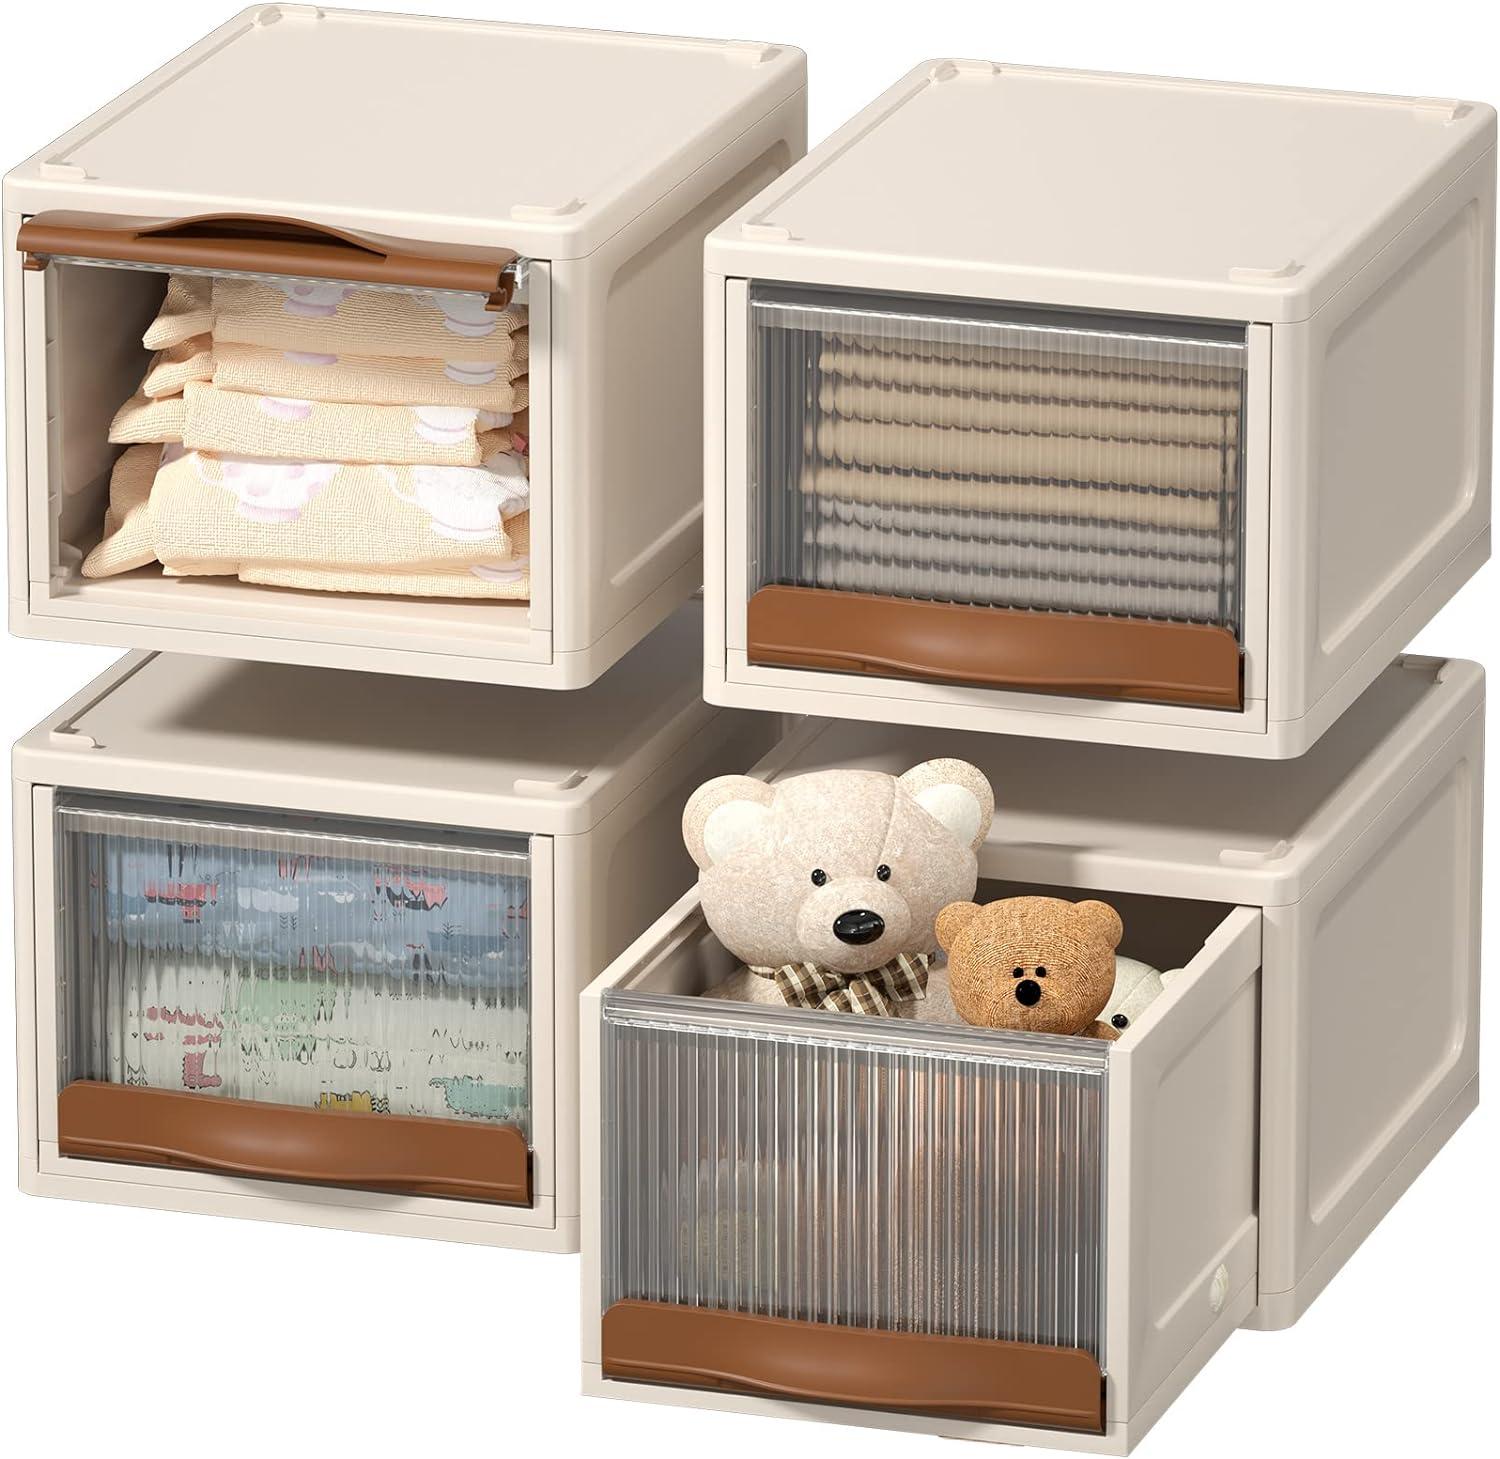 Storage Bins with Drawers 4 Pack for $25.99 Shipped